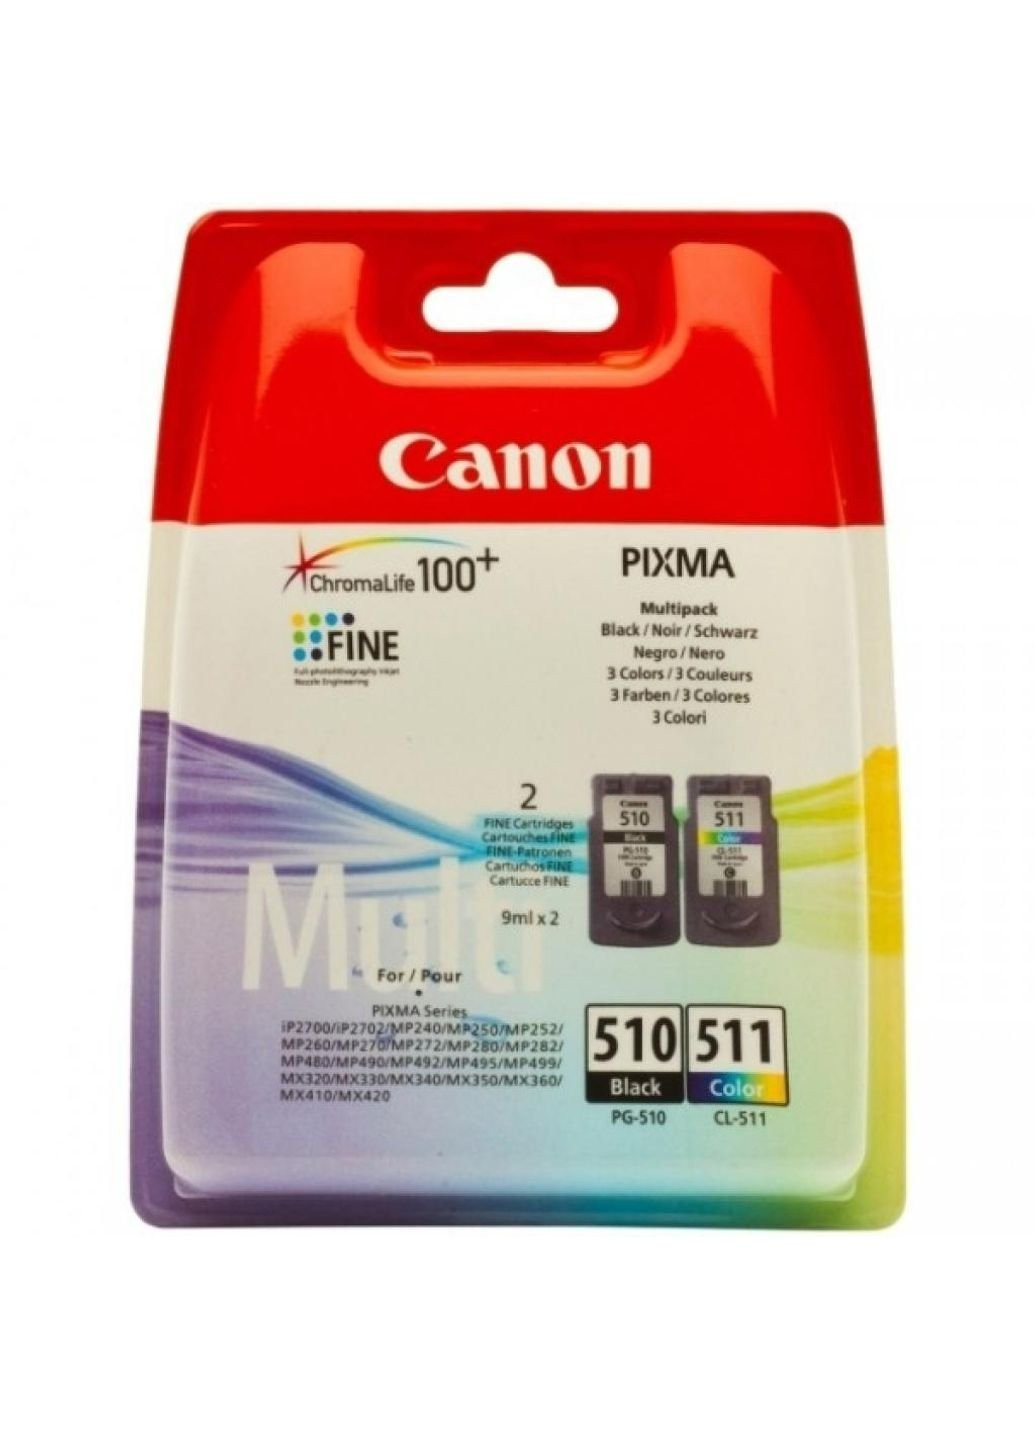 Картридж PG-510 + CL-511 MULTIPACK (2970B010) Canon pg-510+cl-511 multipack (247614727)